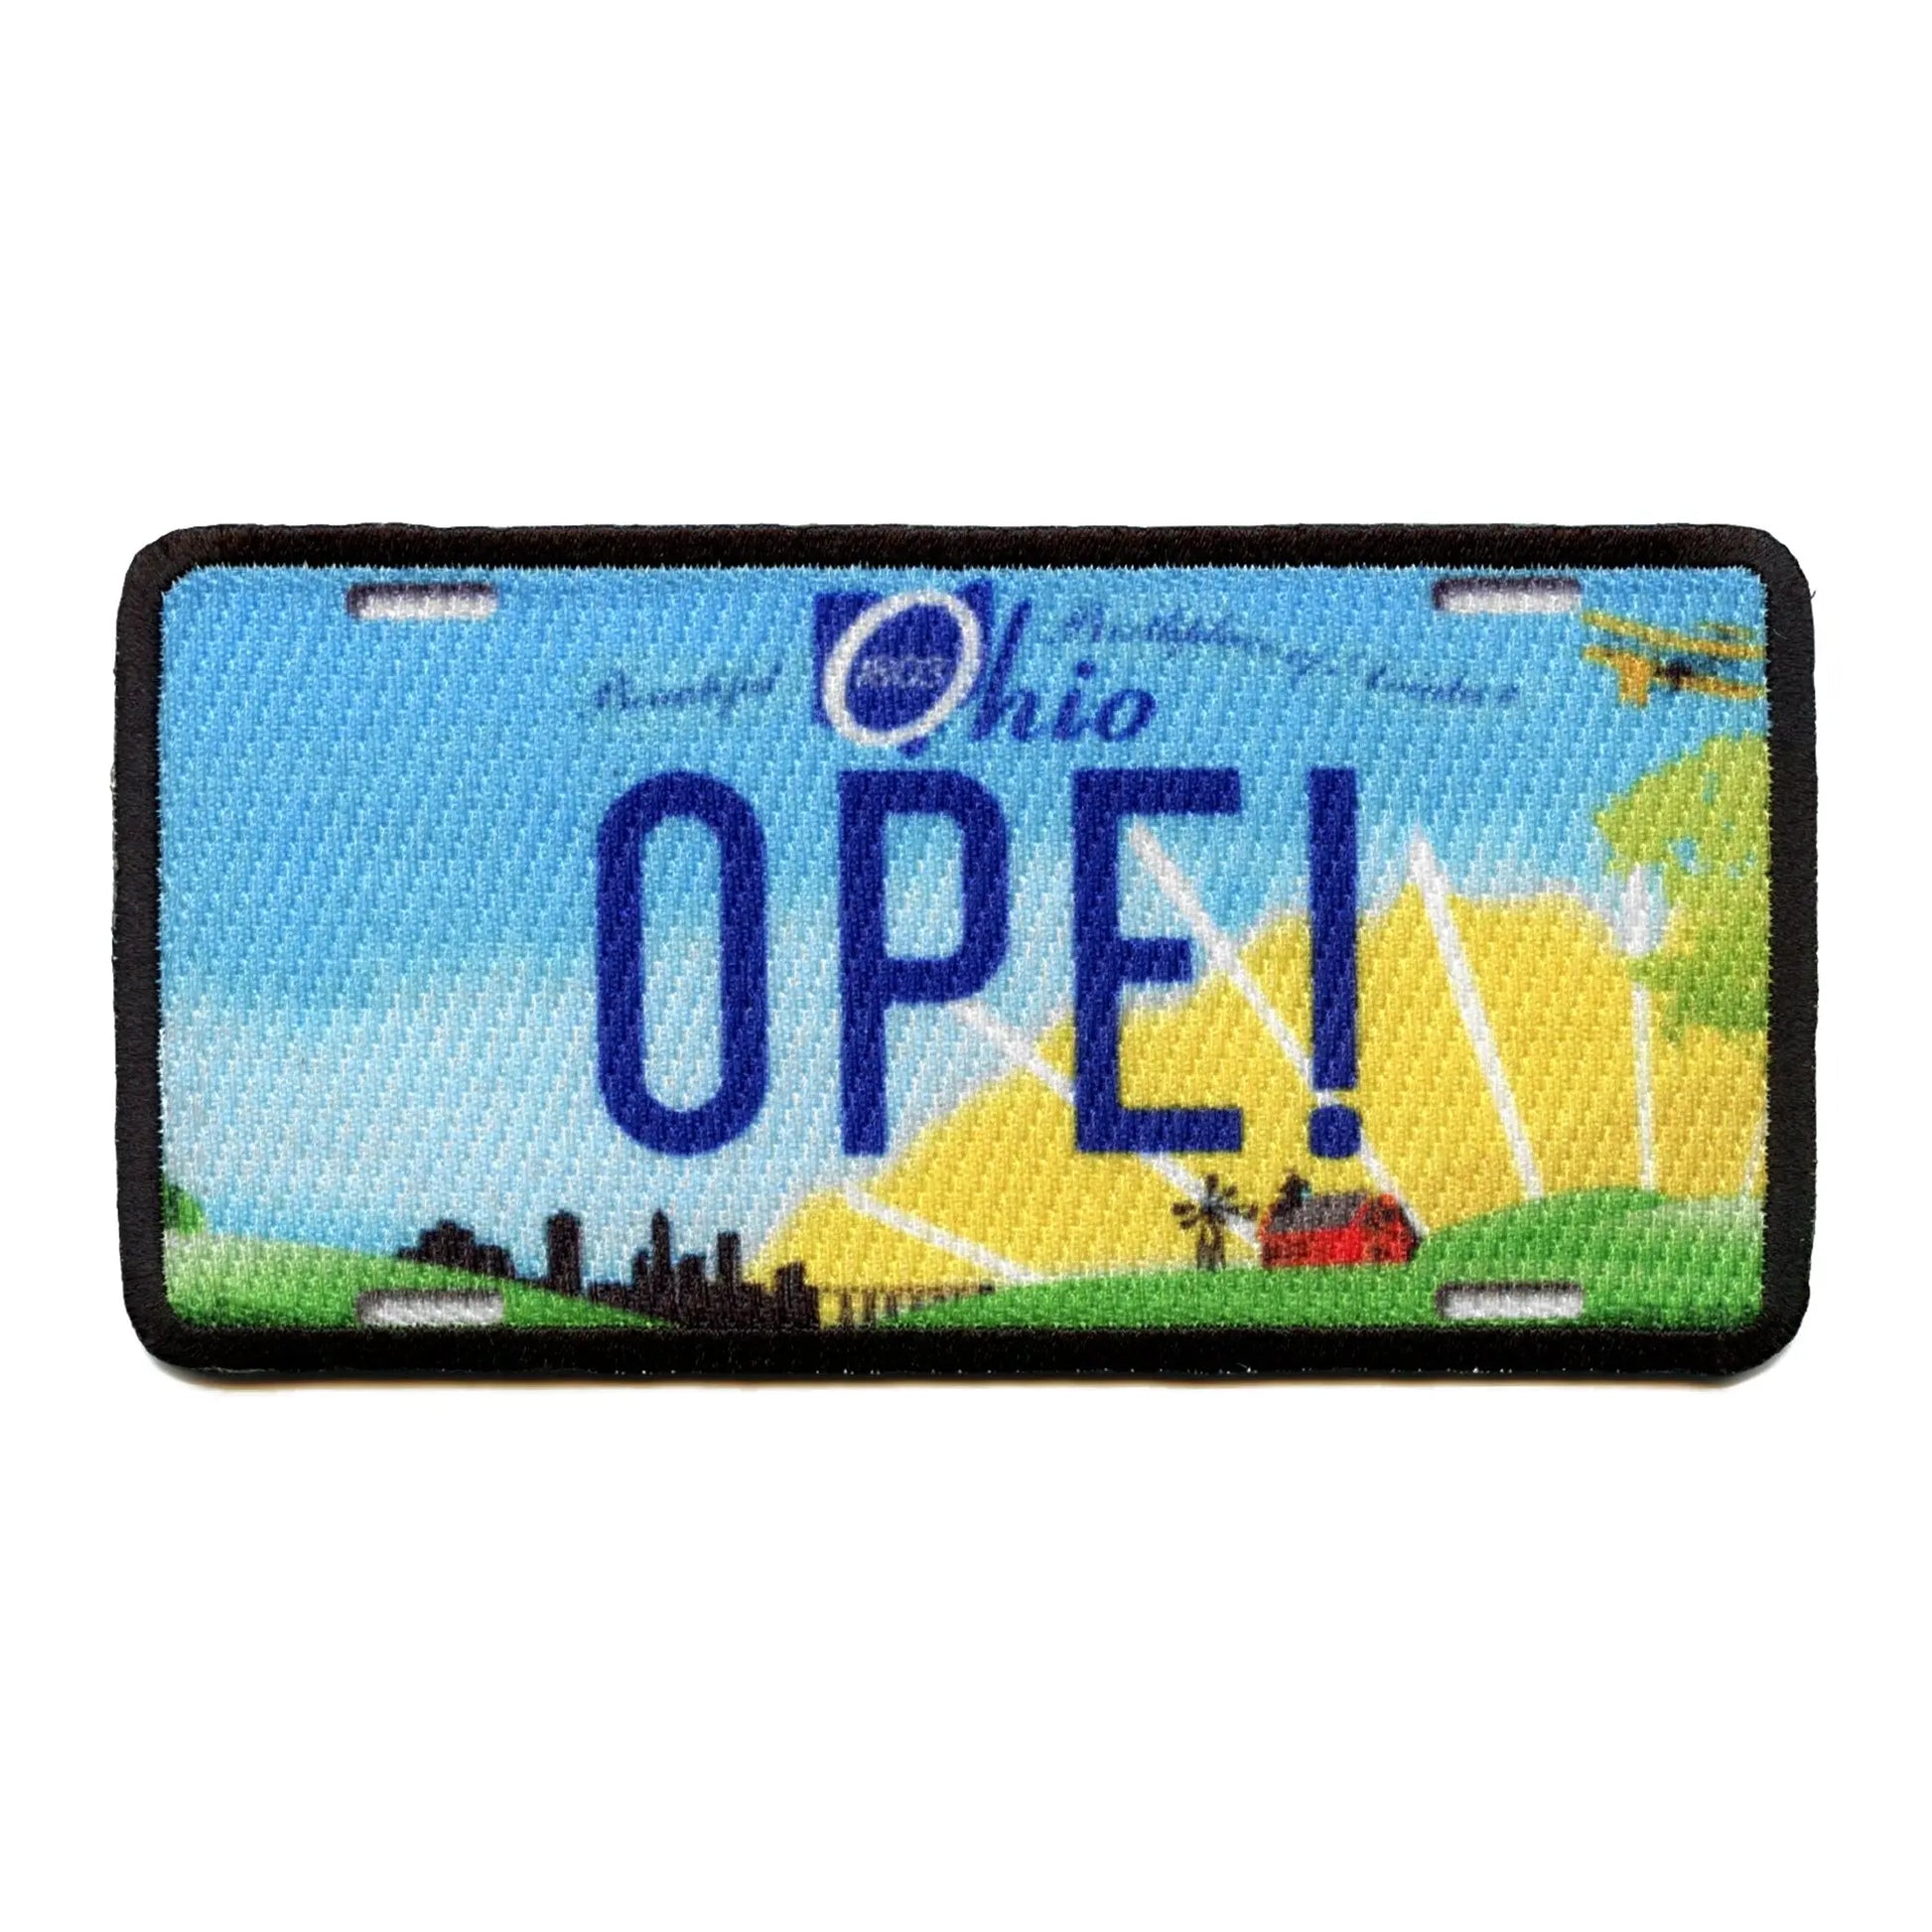 Ohio Ope License Plate Patch Birthplace Of Aviation Embroidered Iron On 